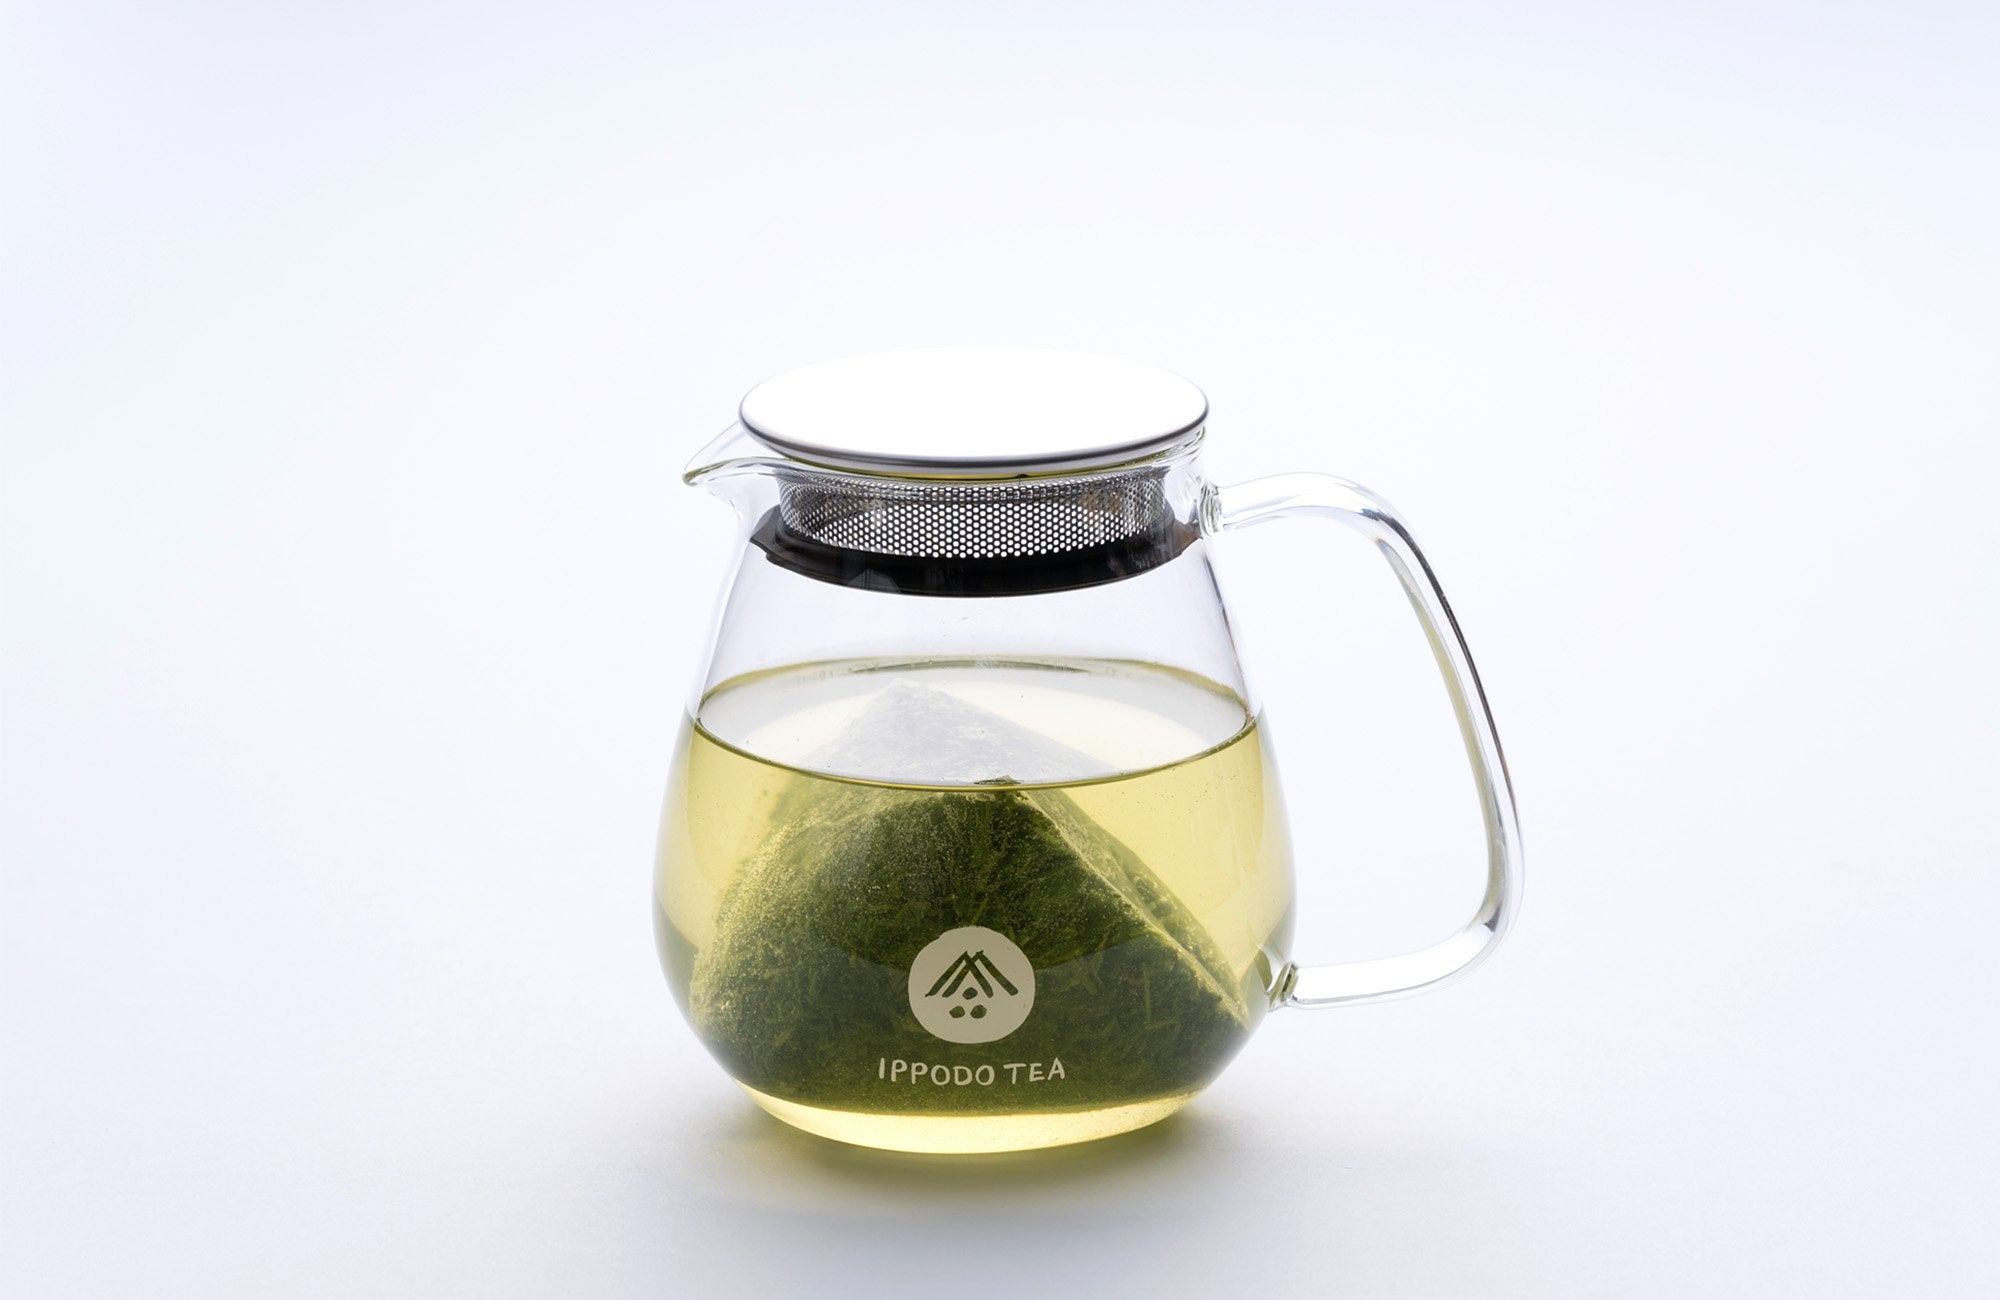 Sencha teabag in a glass teapot steeping in hot water.